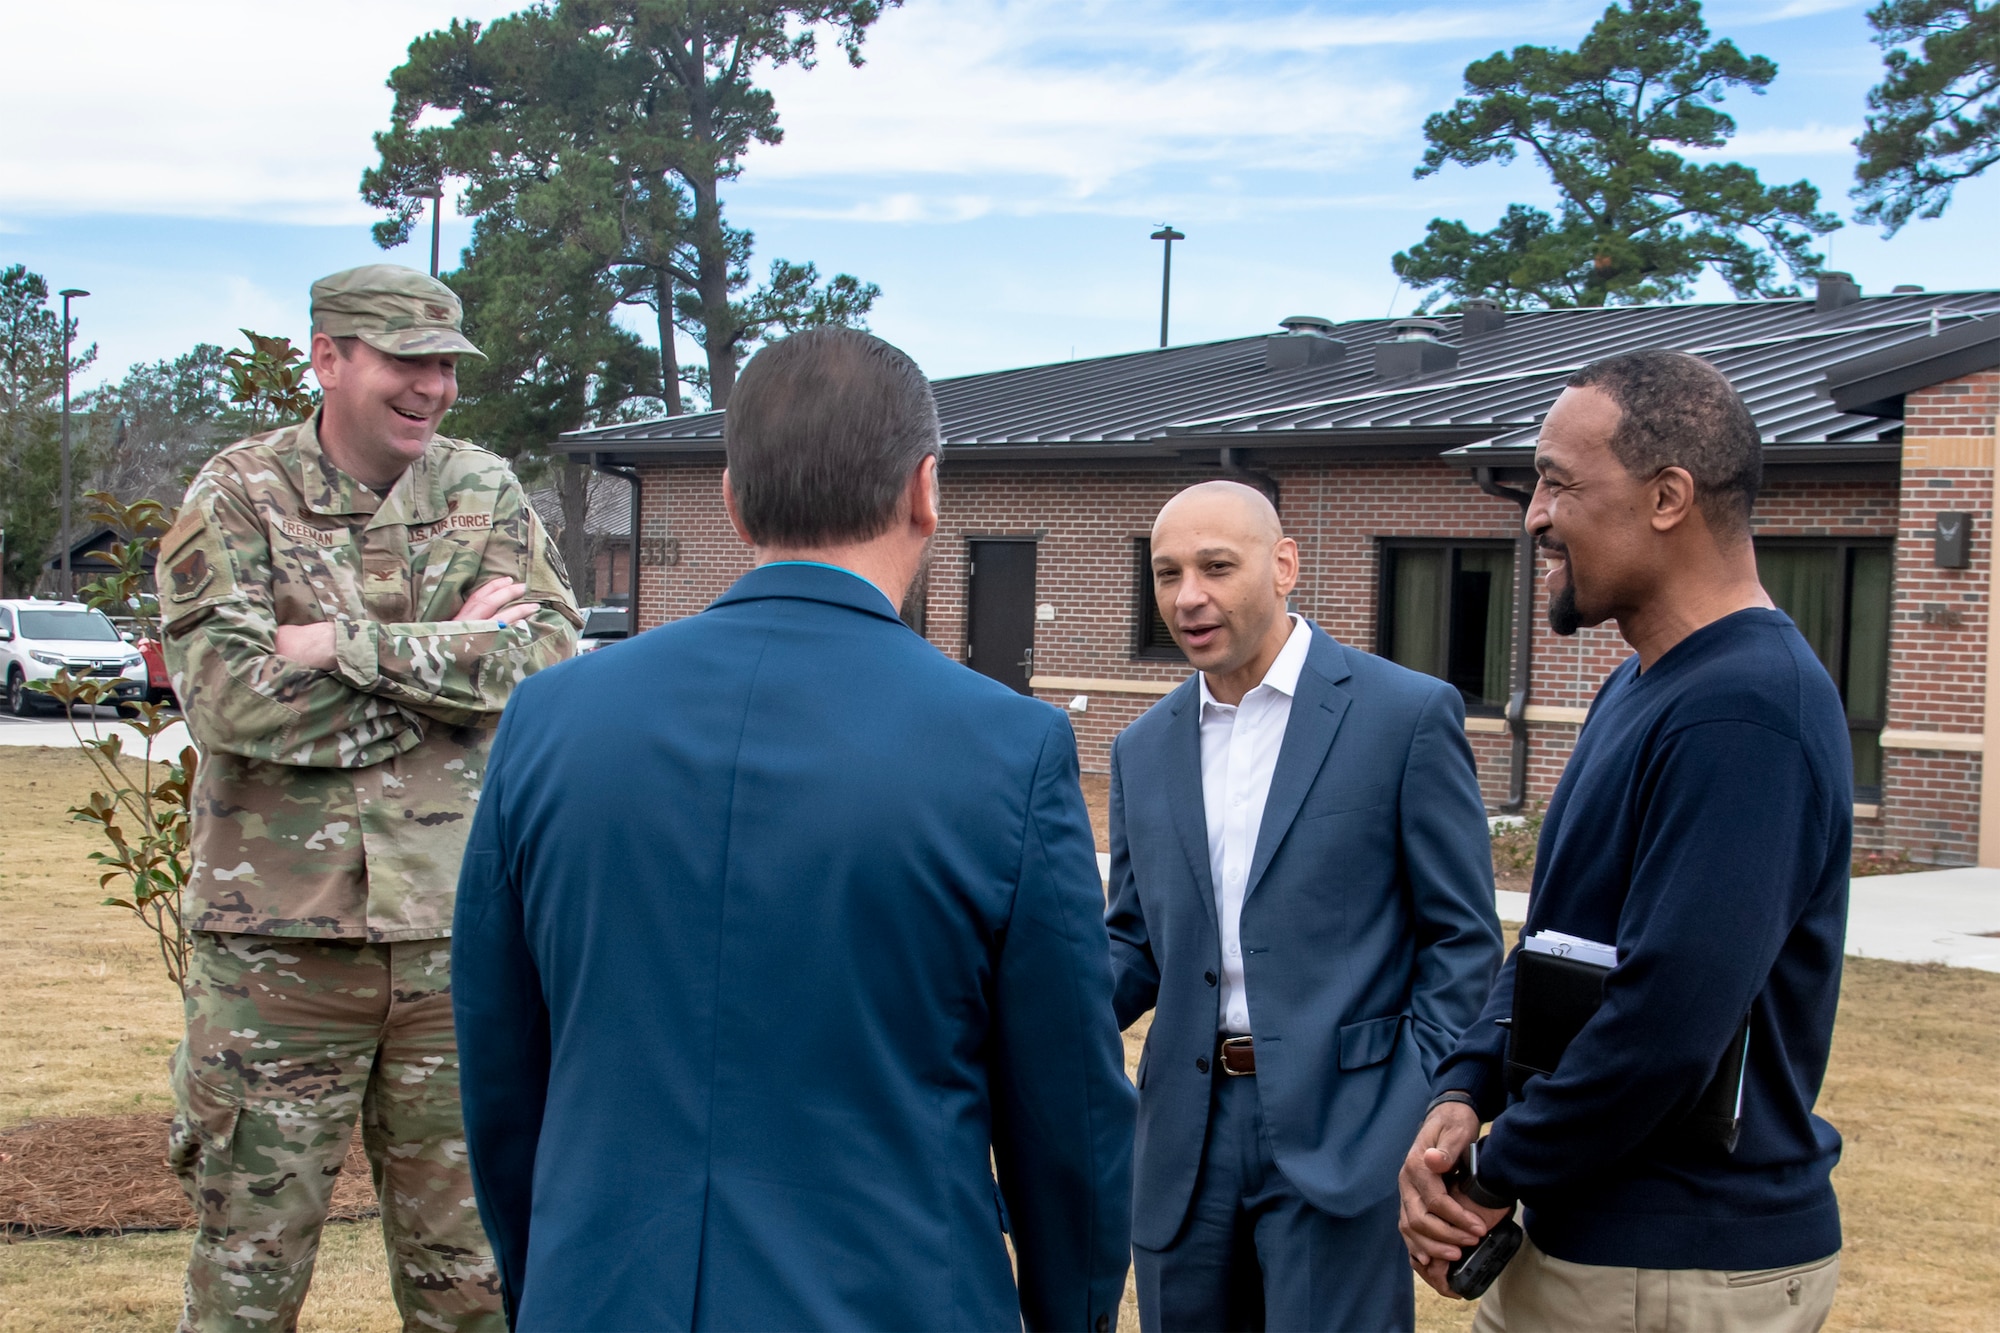 U.S. Air Force Col. Michael Freeman, 628th Air Base Wing commander, visits with guests during the temporary lodging facility grand opening on Joint Base Charleston, South Carolina.